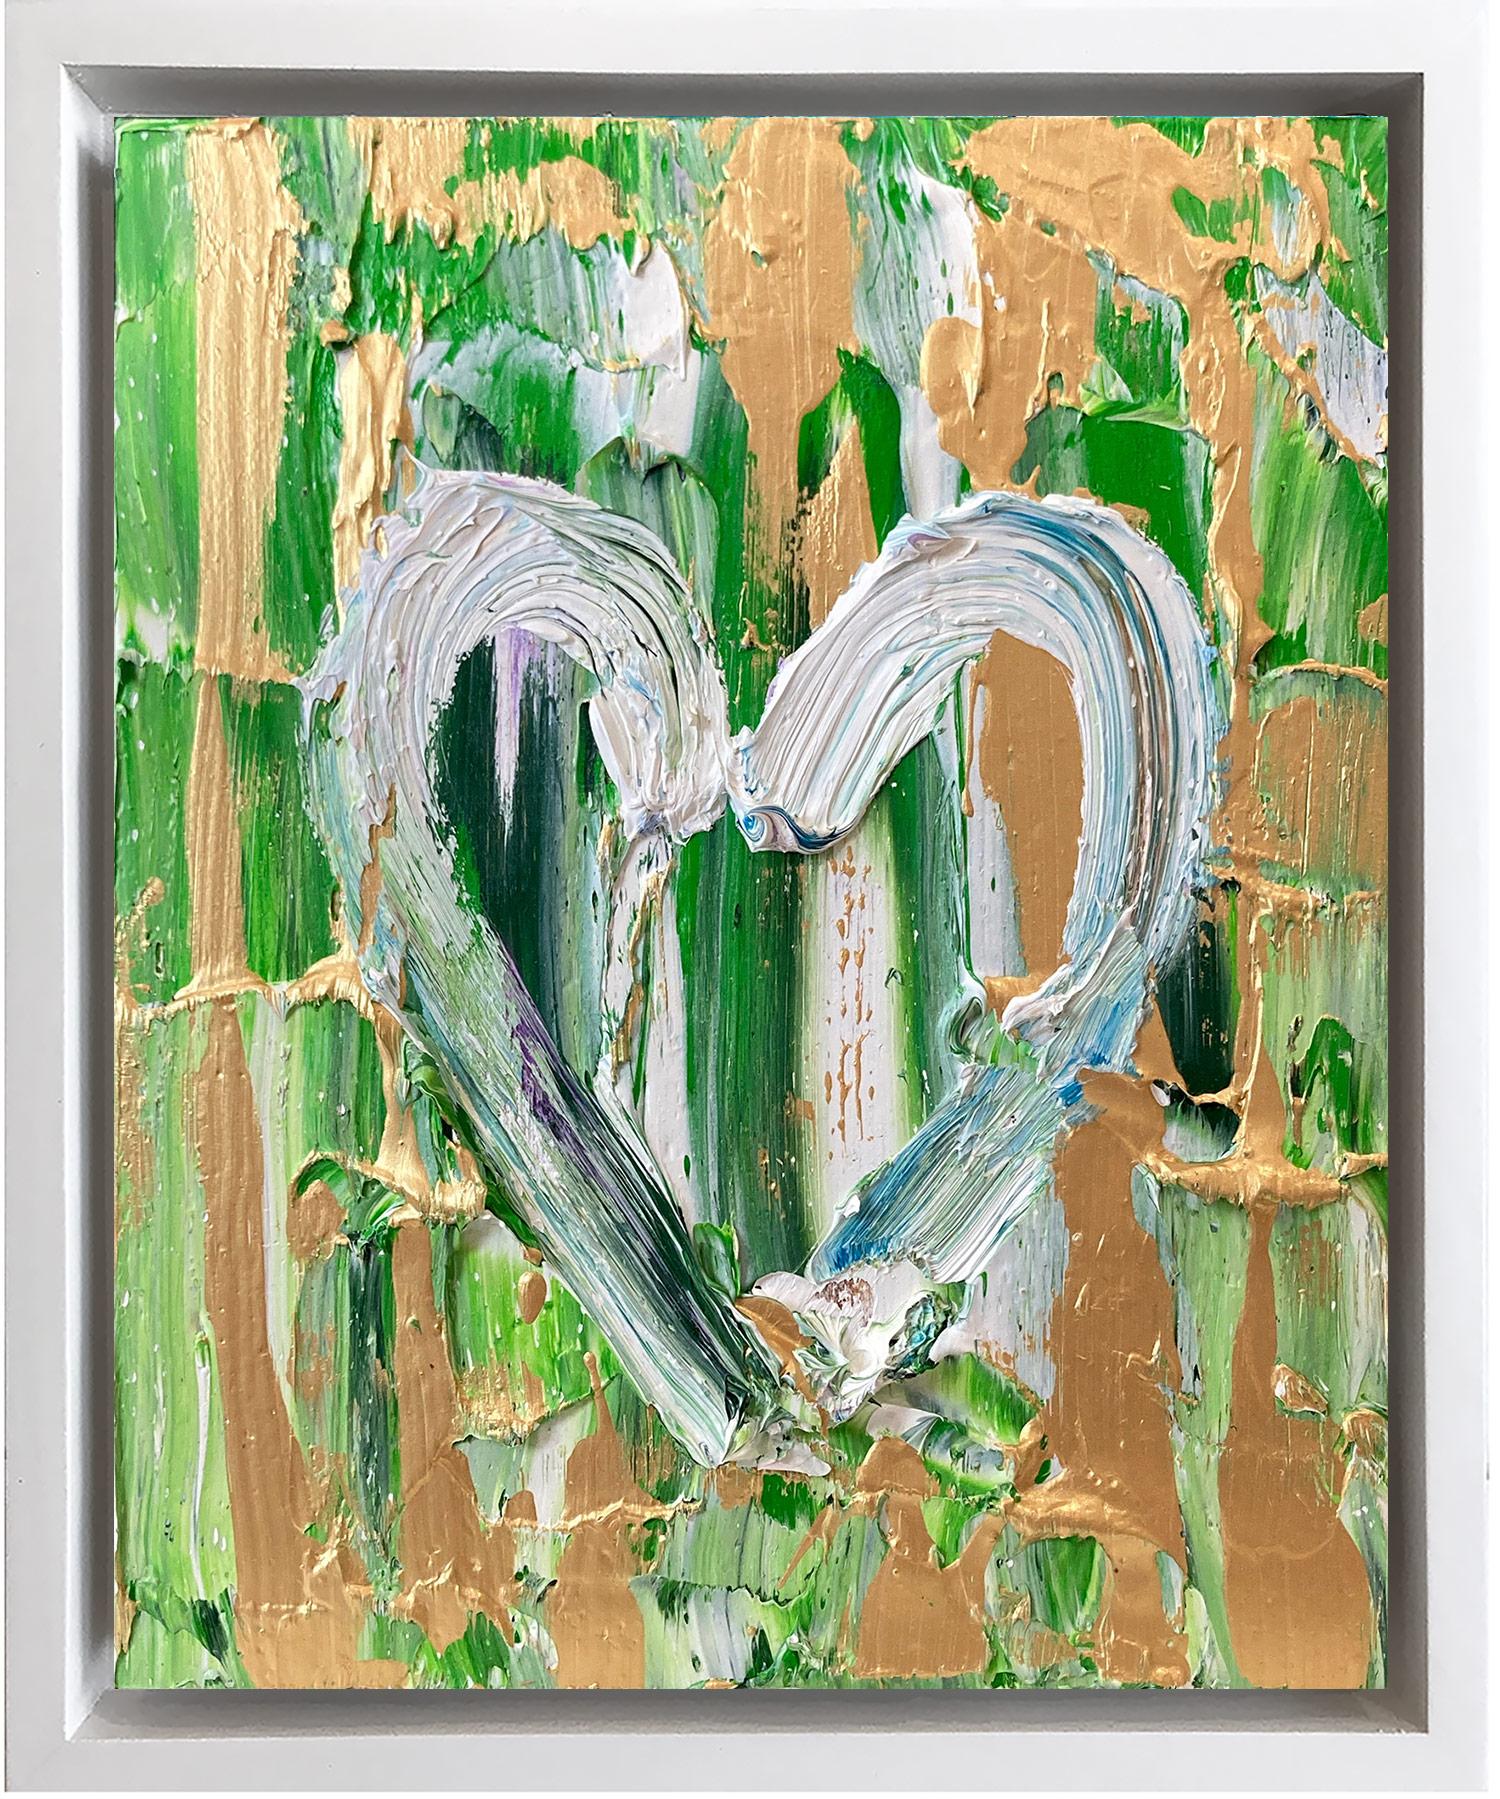 Cindy Shaoul Figurative Painting - "My KAWS Heart" Green & Gold Colorful Pop Art Oil Painting White Floater Frame